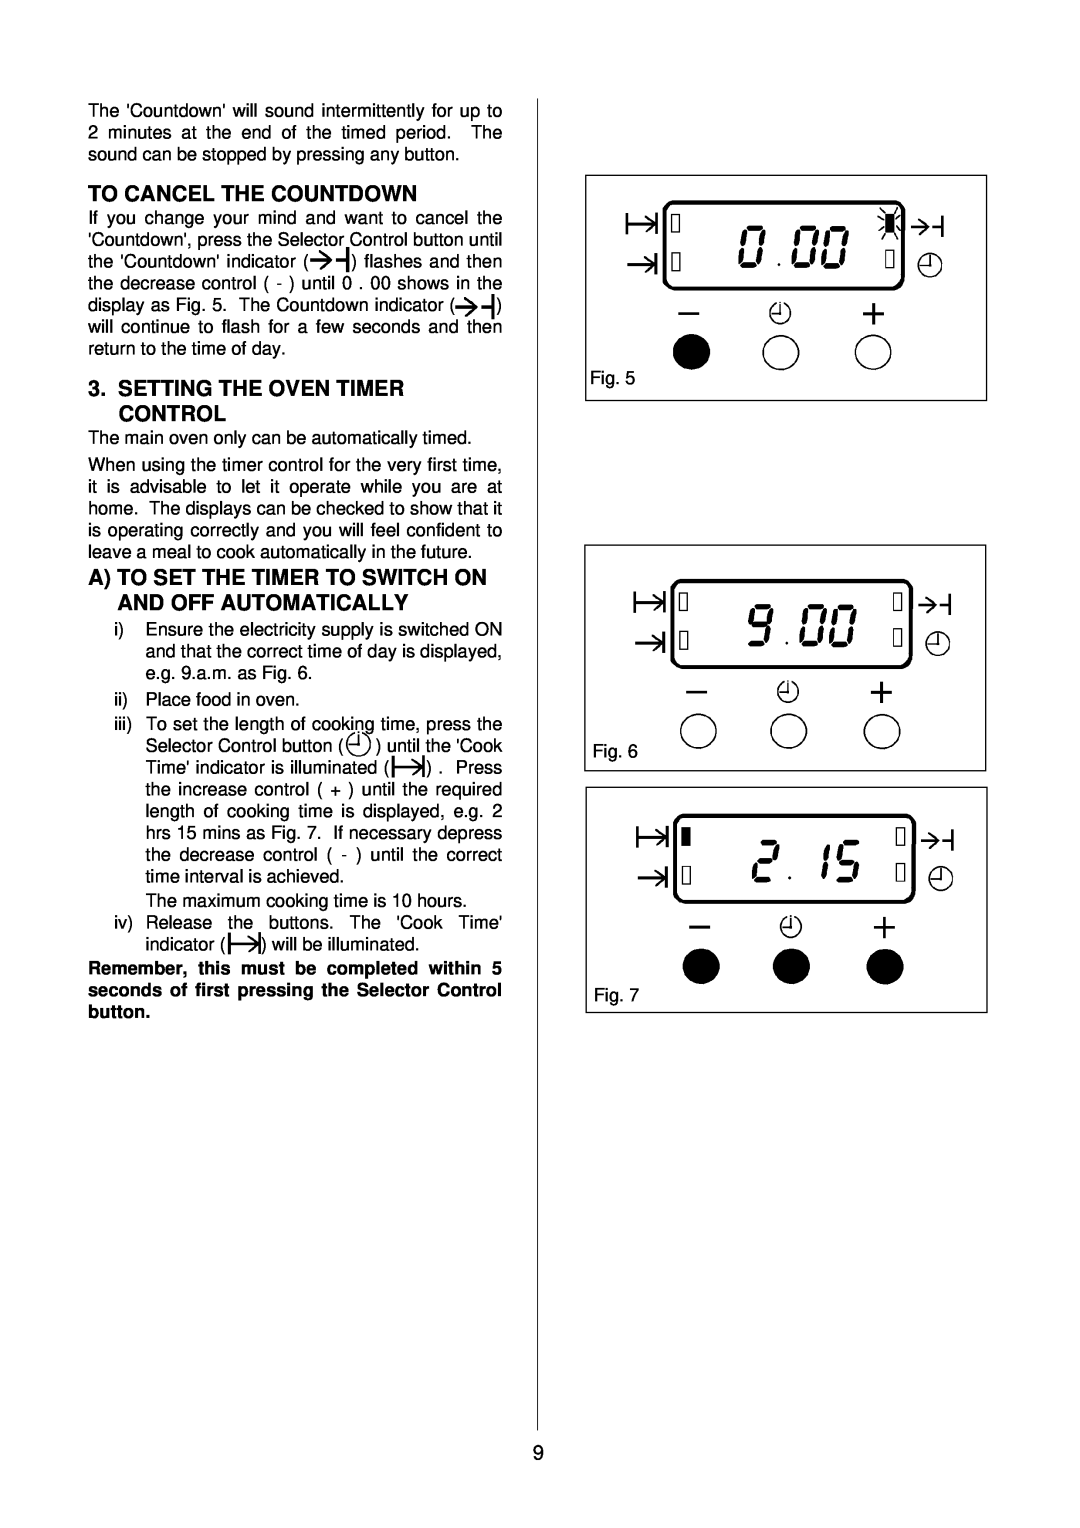 Electrolux D2160-1 operating instructions To Cancel The Countdown, Setting The Oven Timer Control 